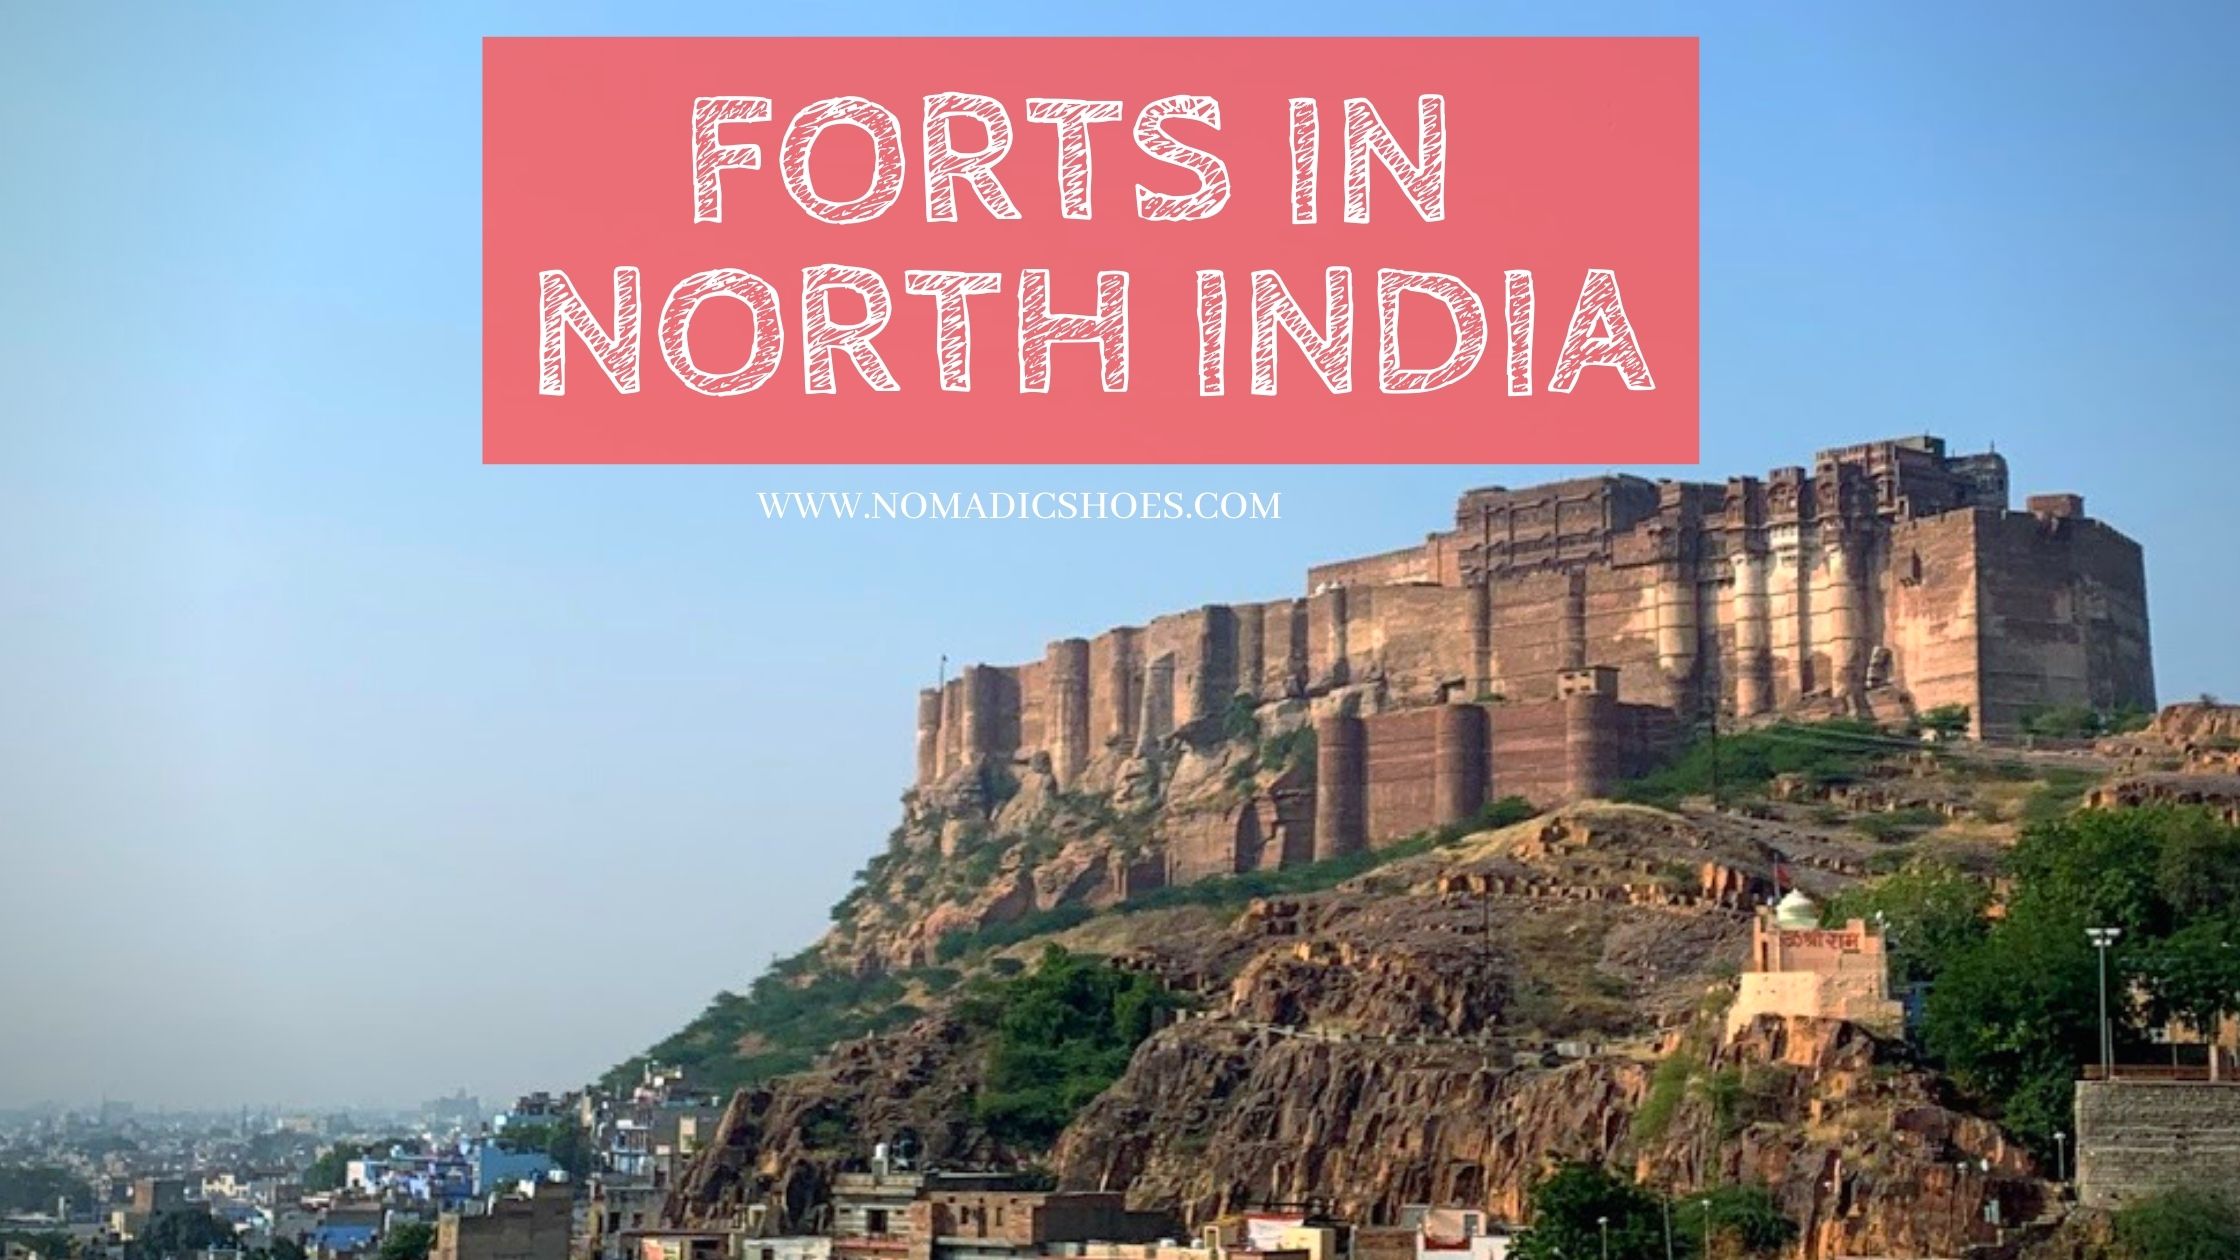 Forts in North India - Nomadic Shoes